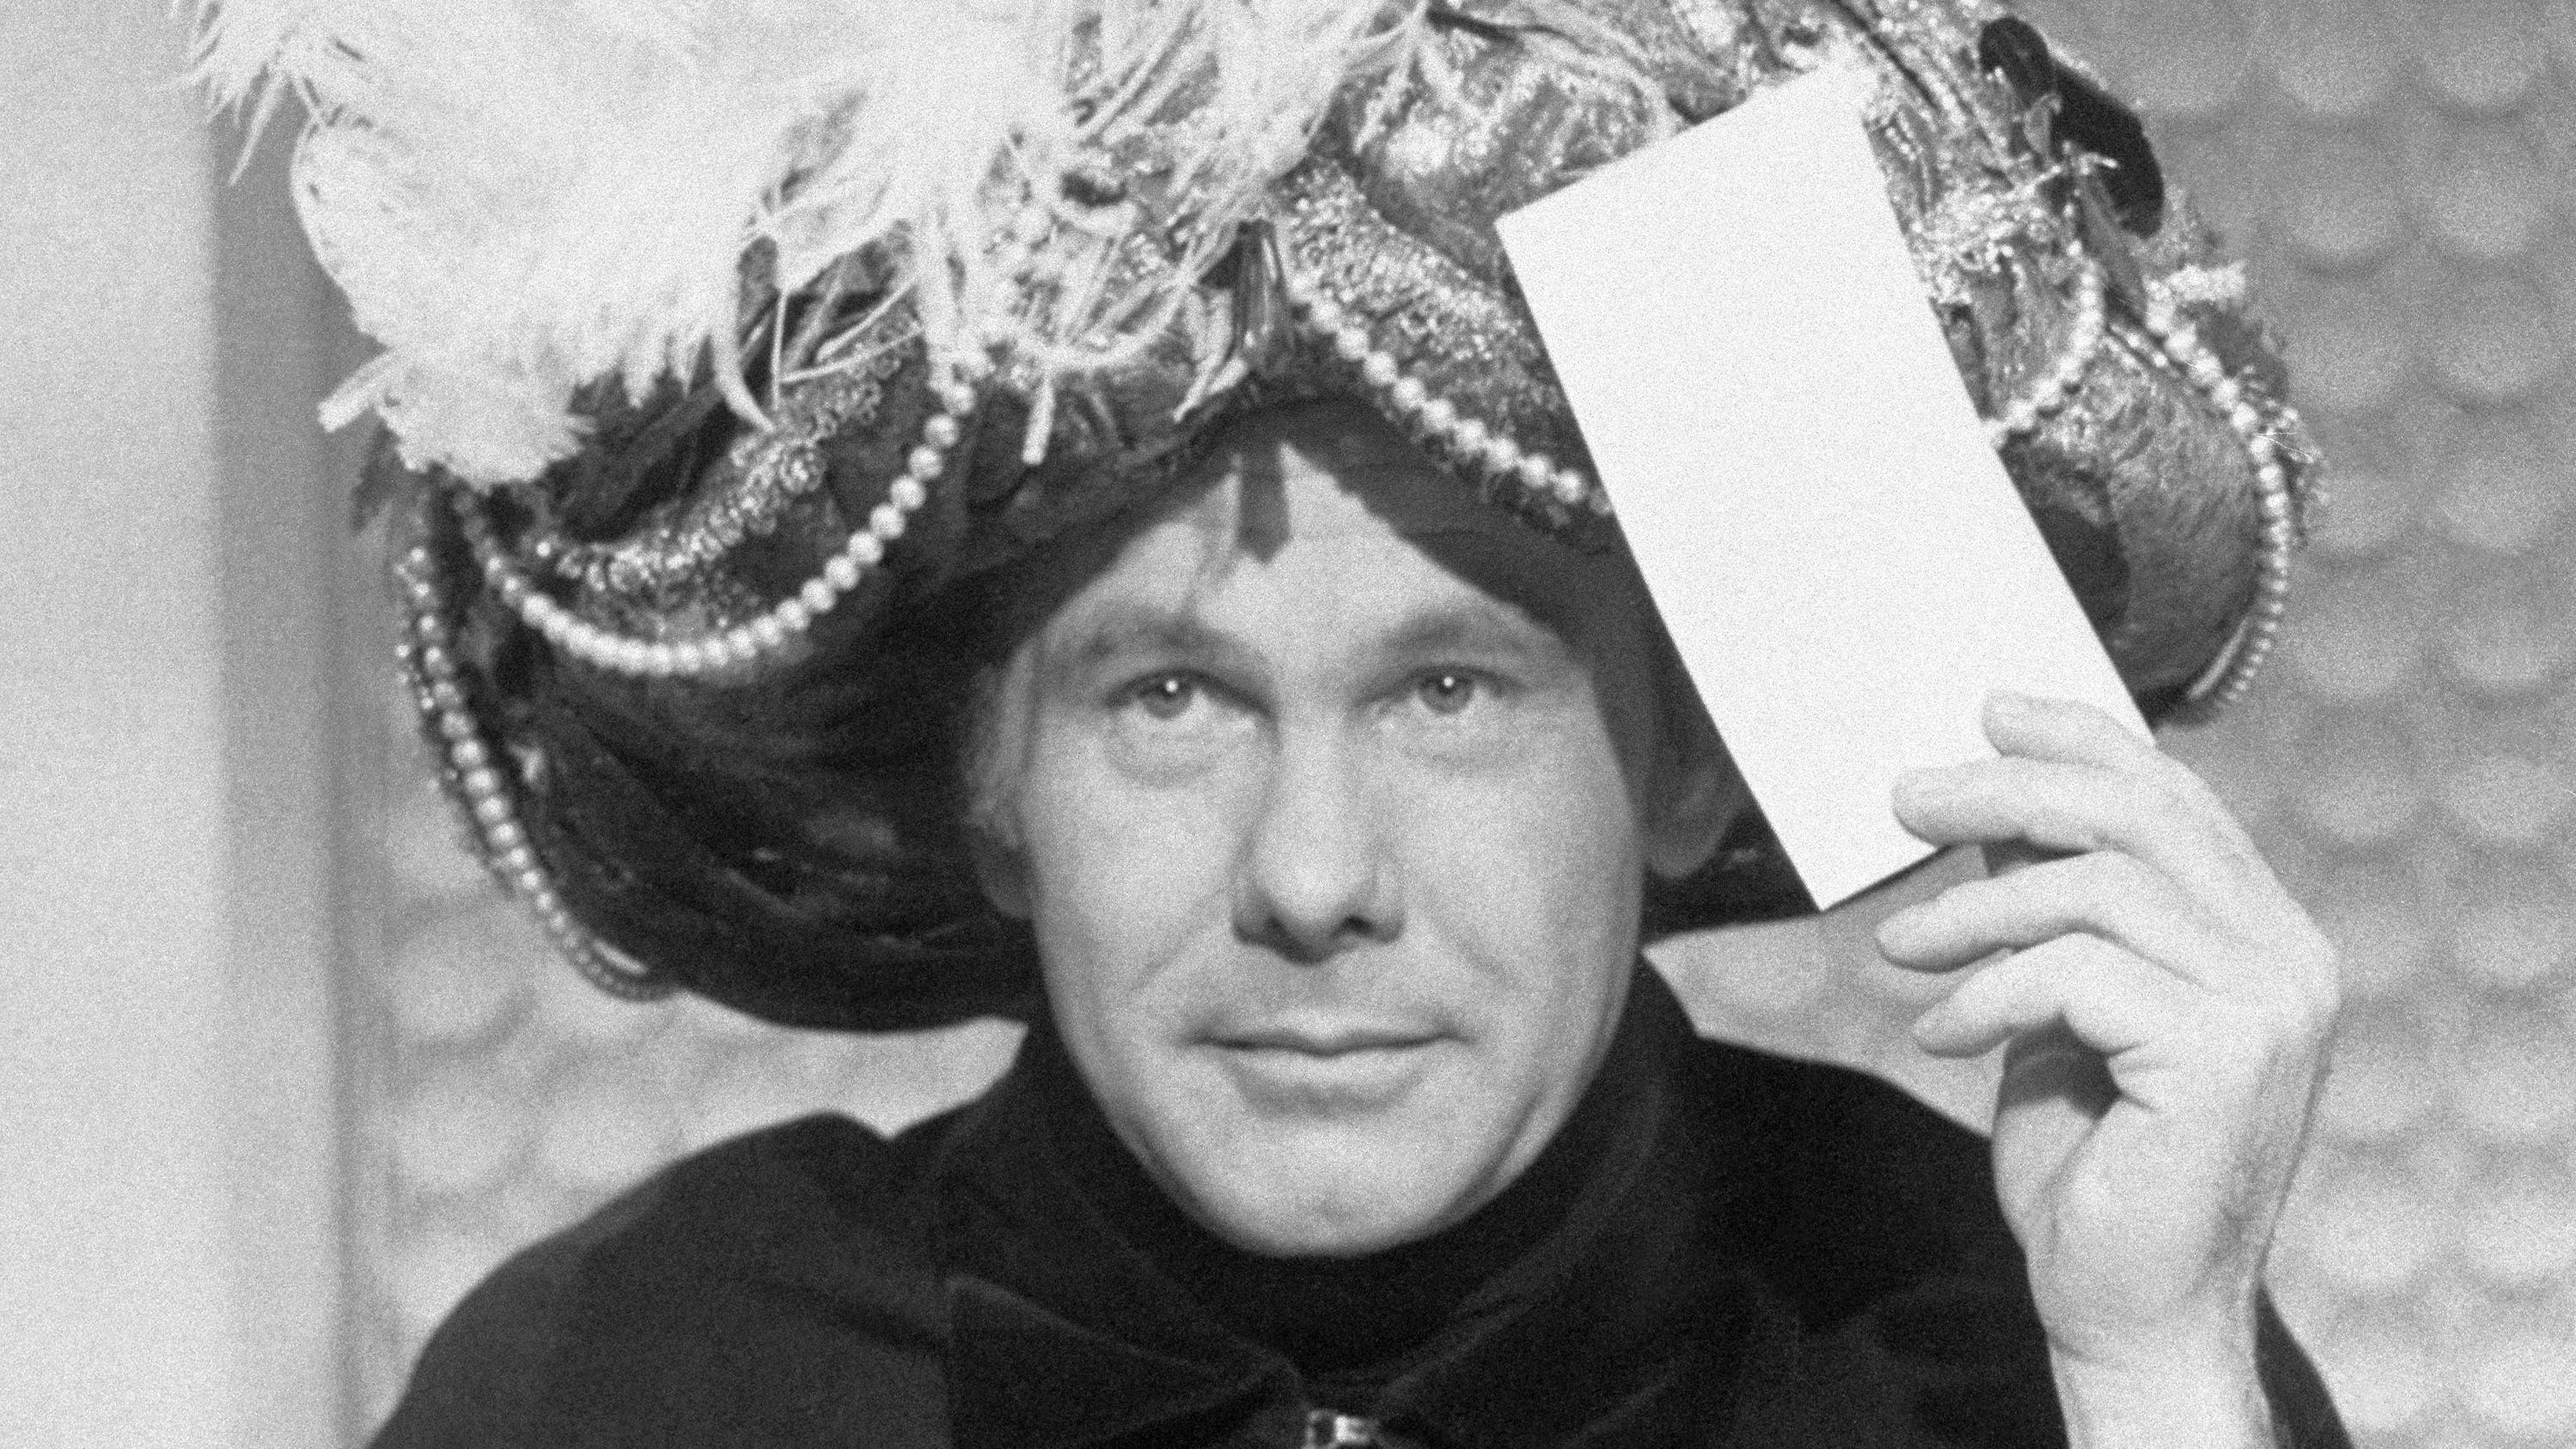 Johnny Carson making a prediction as "Carnac the Magnificent" (Getty Images)